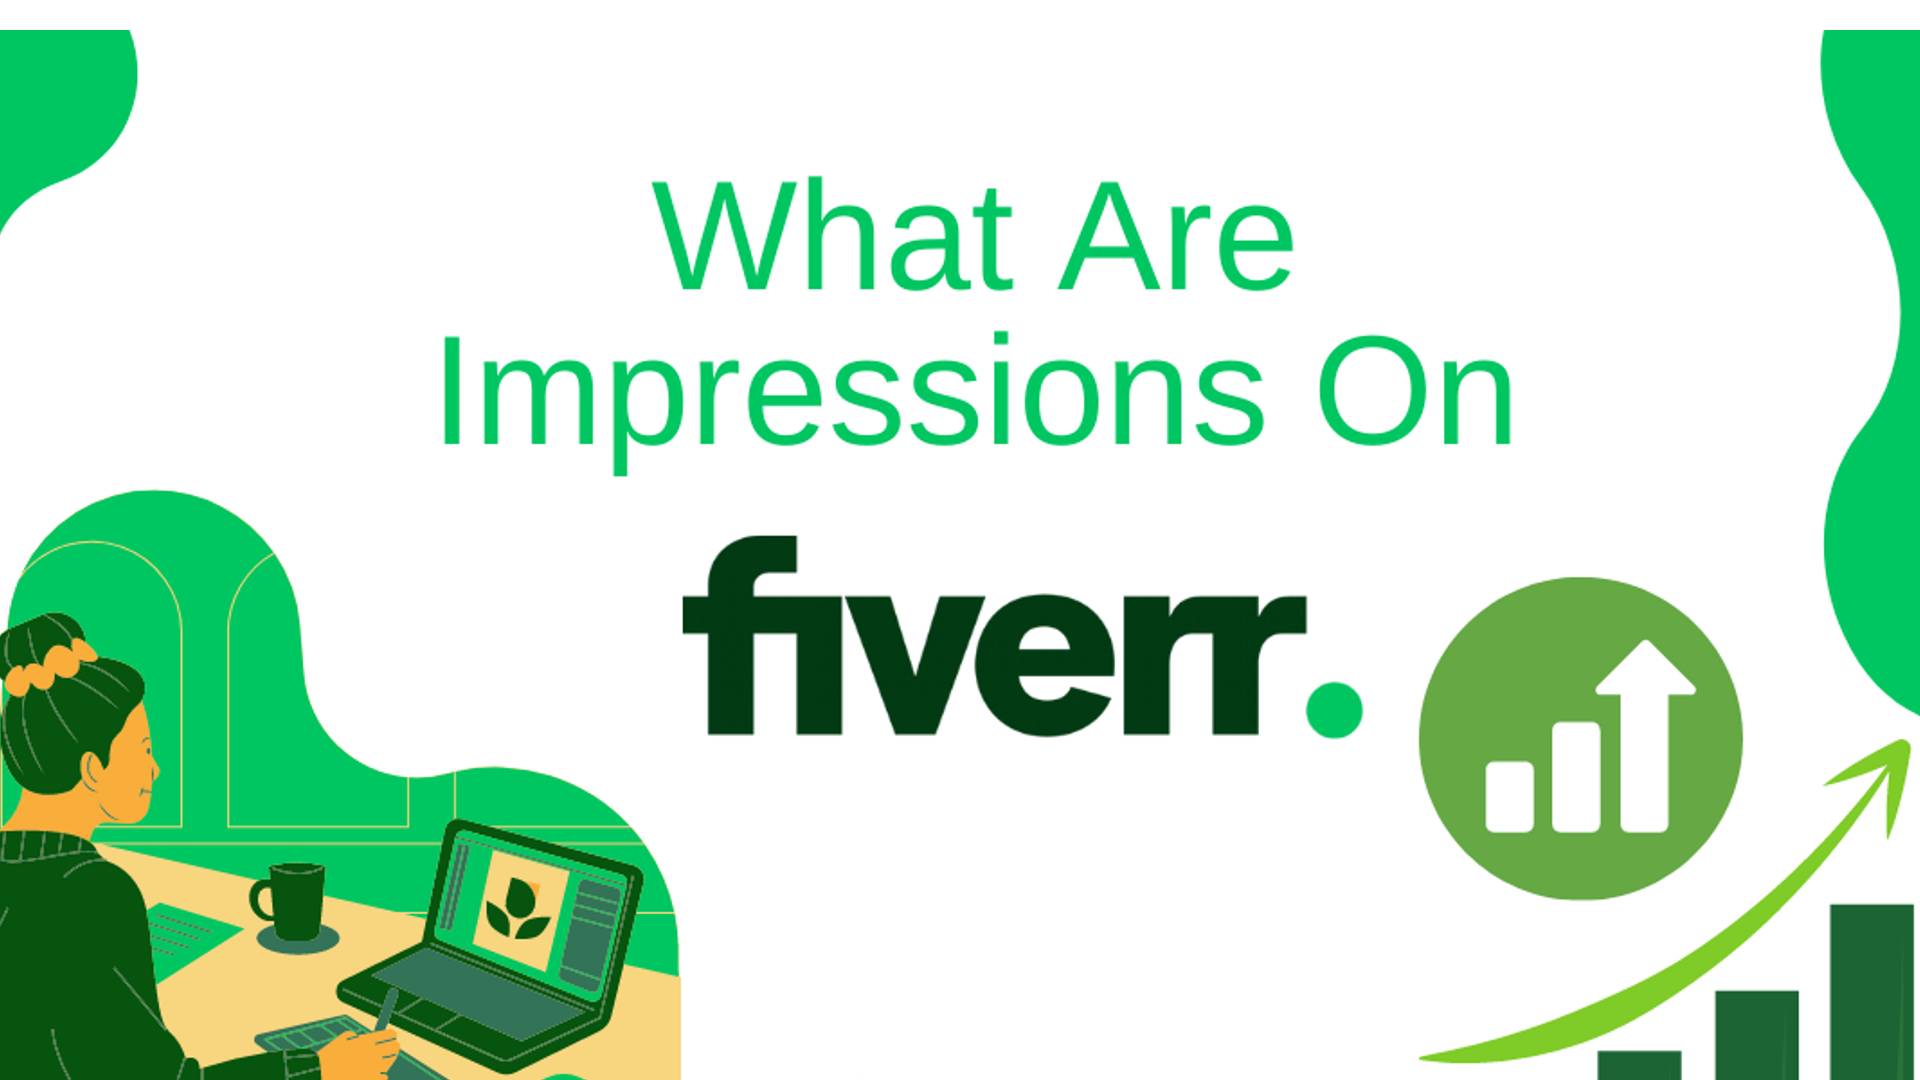 You are currently viewing How to Improve Fiverr Impressions ?